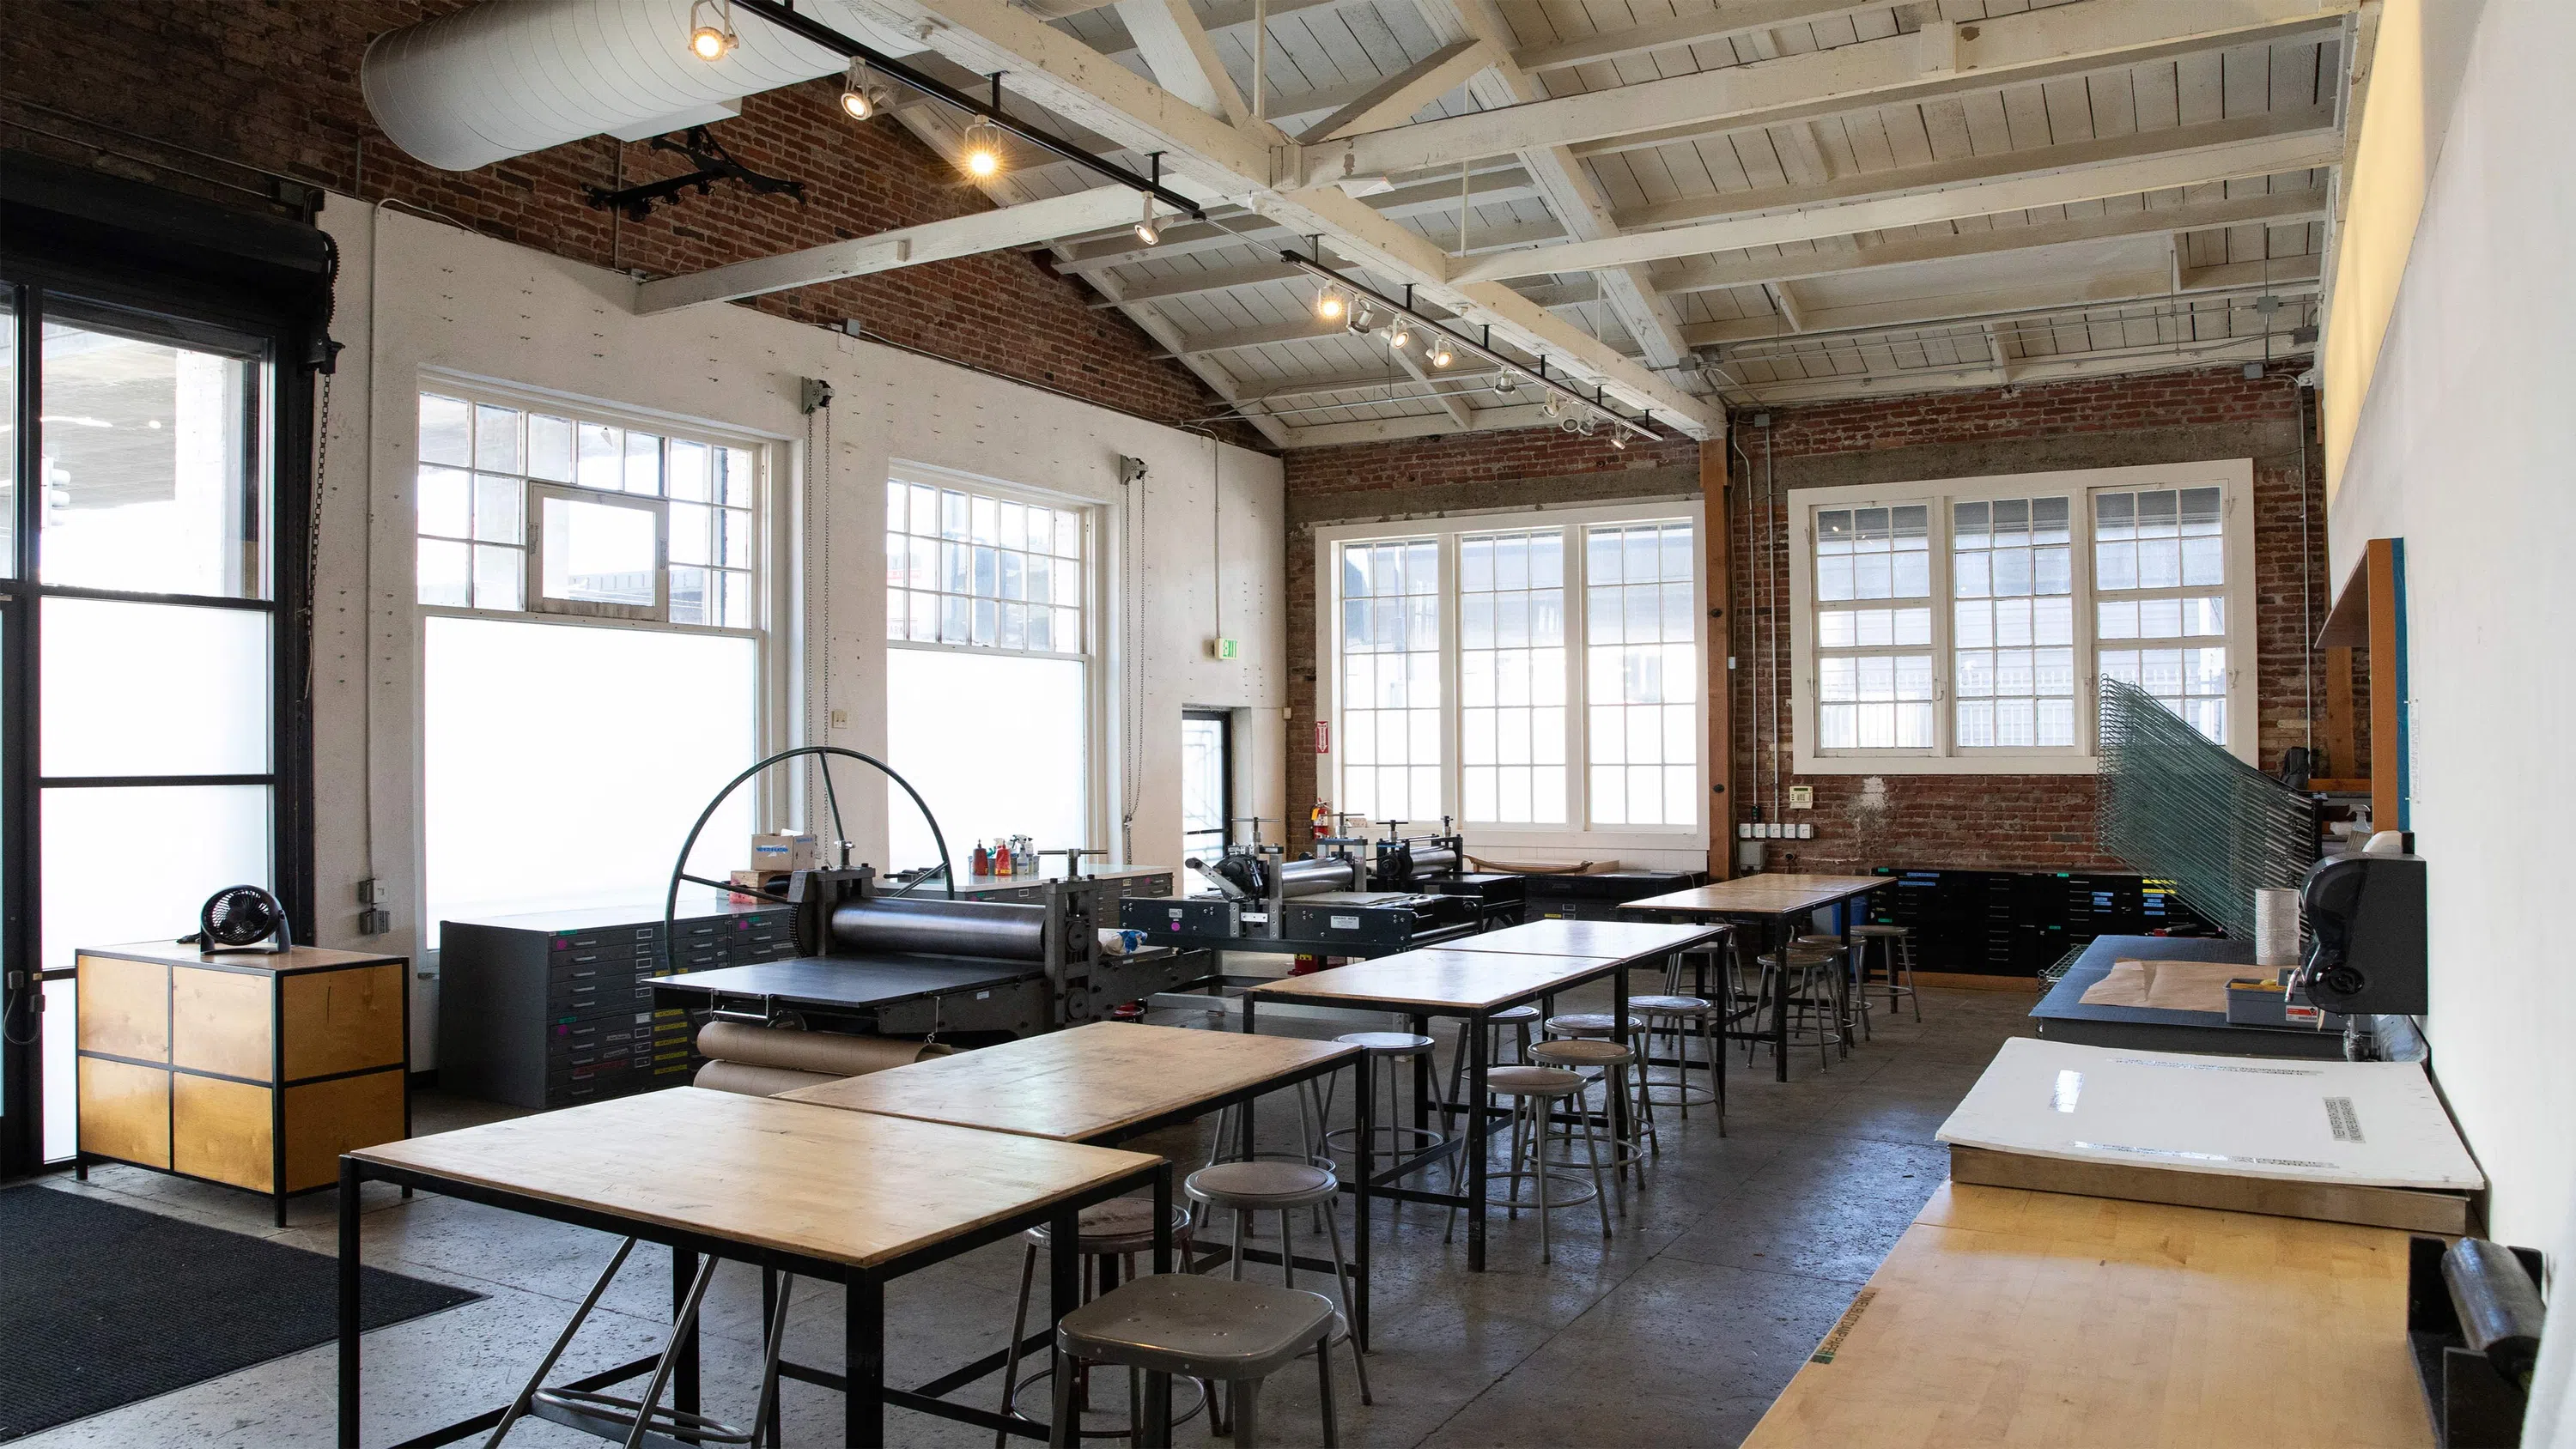 Tables, chairs, and printmedia equipment in a large room with brick walls and large windows. 